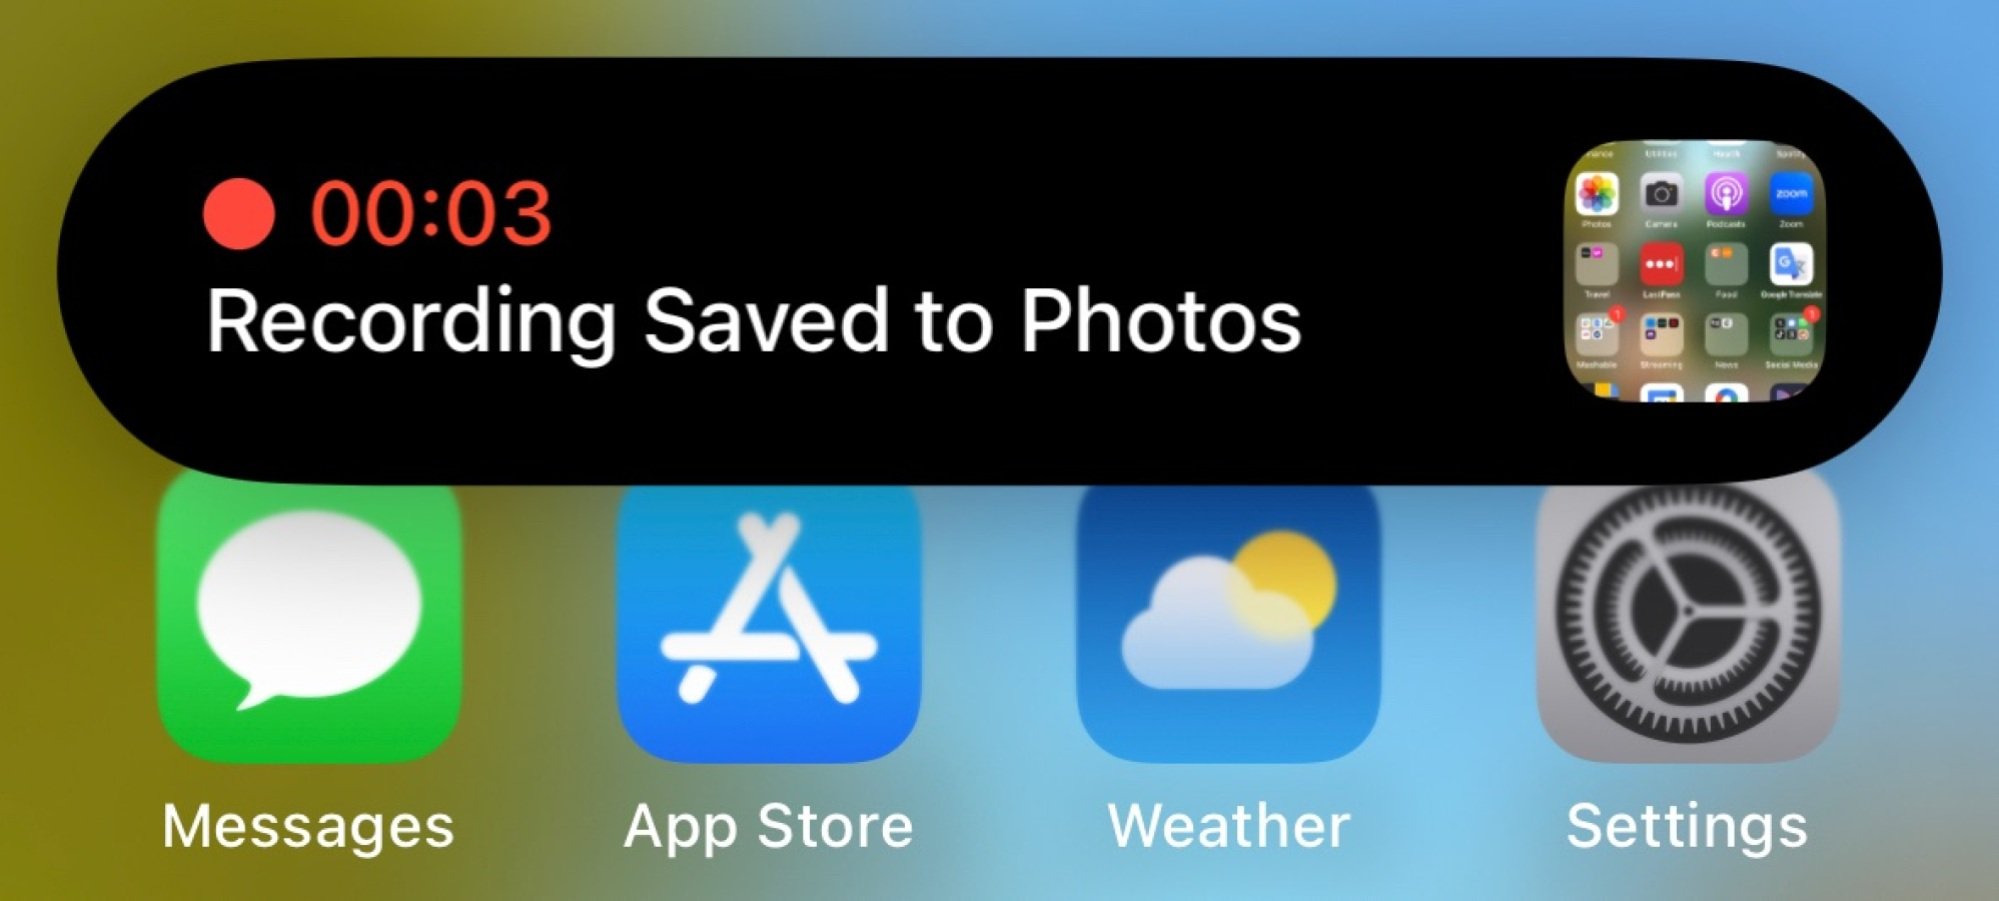 iPhone showing a recording being saved to Photos